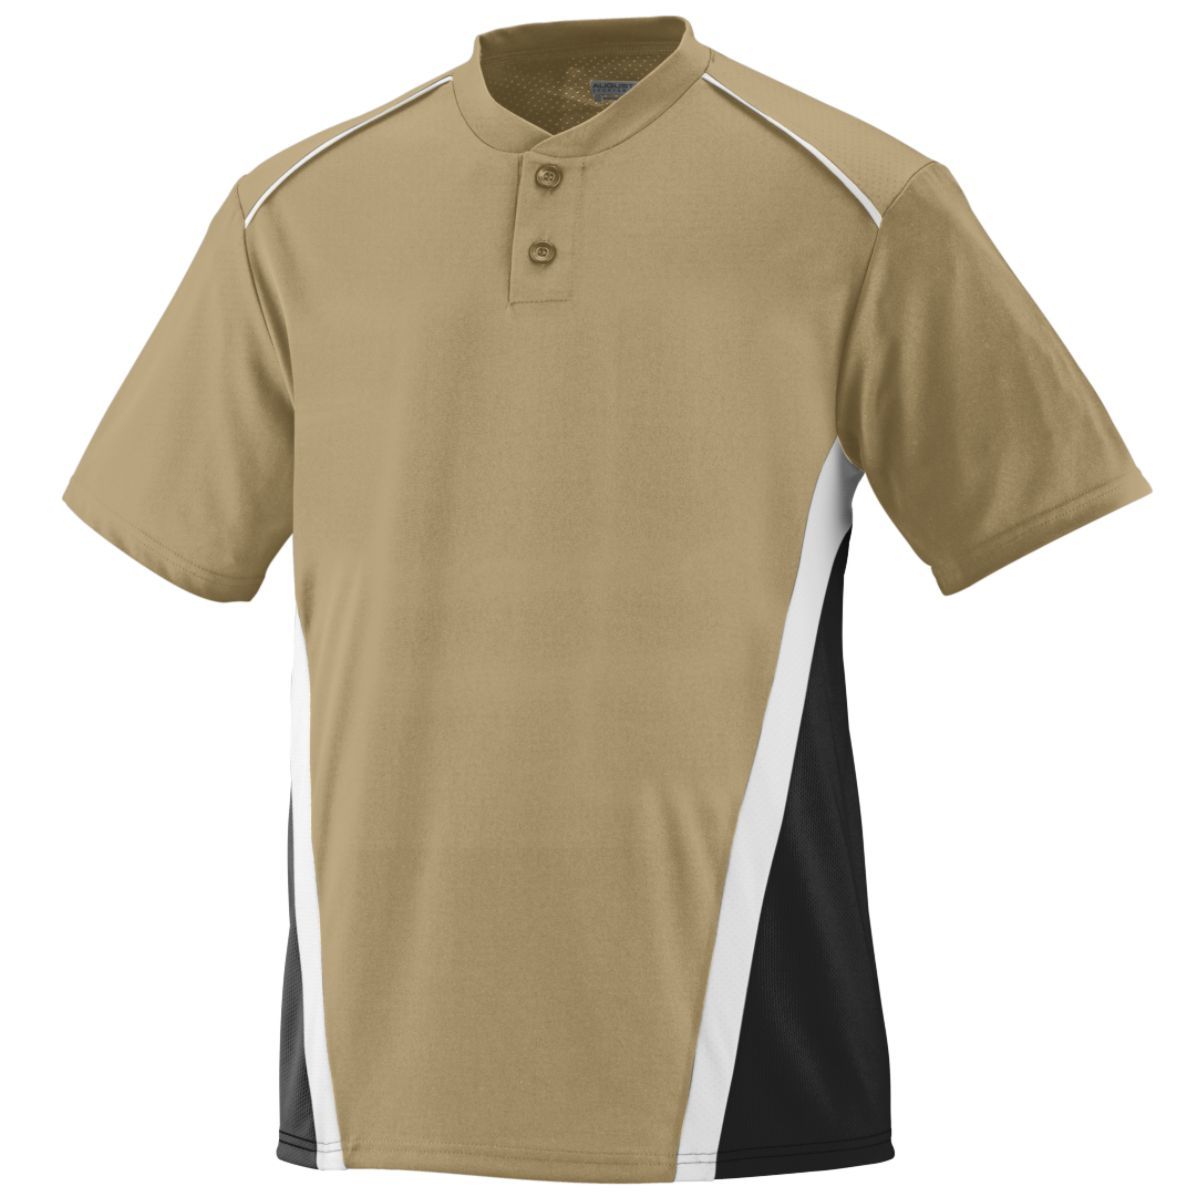 Augusta Sportswear Rbi Jersey in Vegas Gold/Black/White  -Part of the Adult, Adult-Jersey, Augusta-Products, Softball, Shirts product lines at KanaleyCreations.com